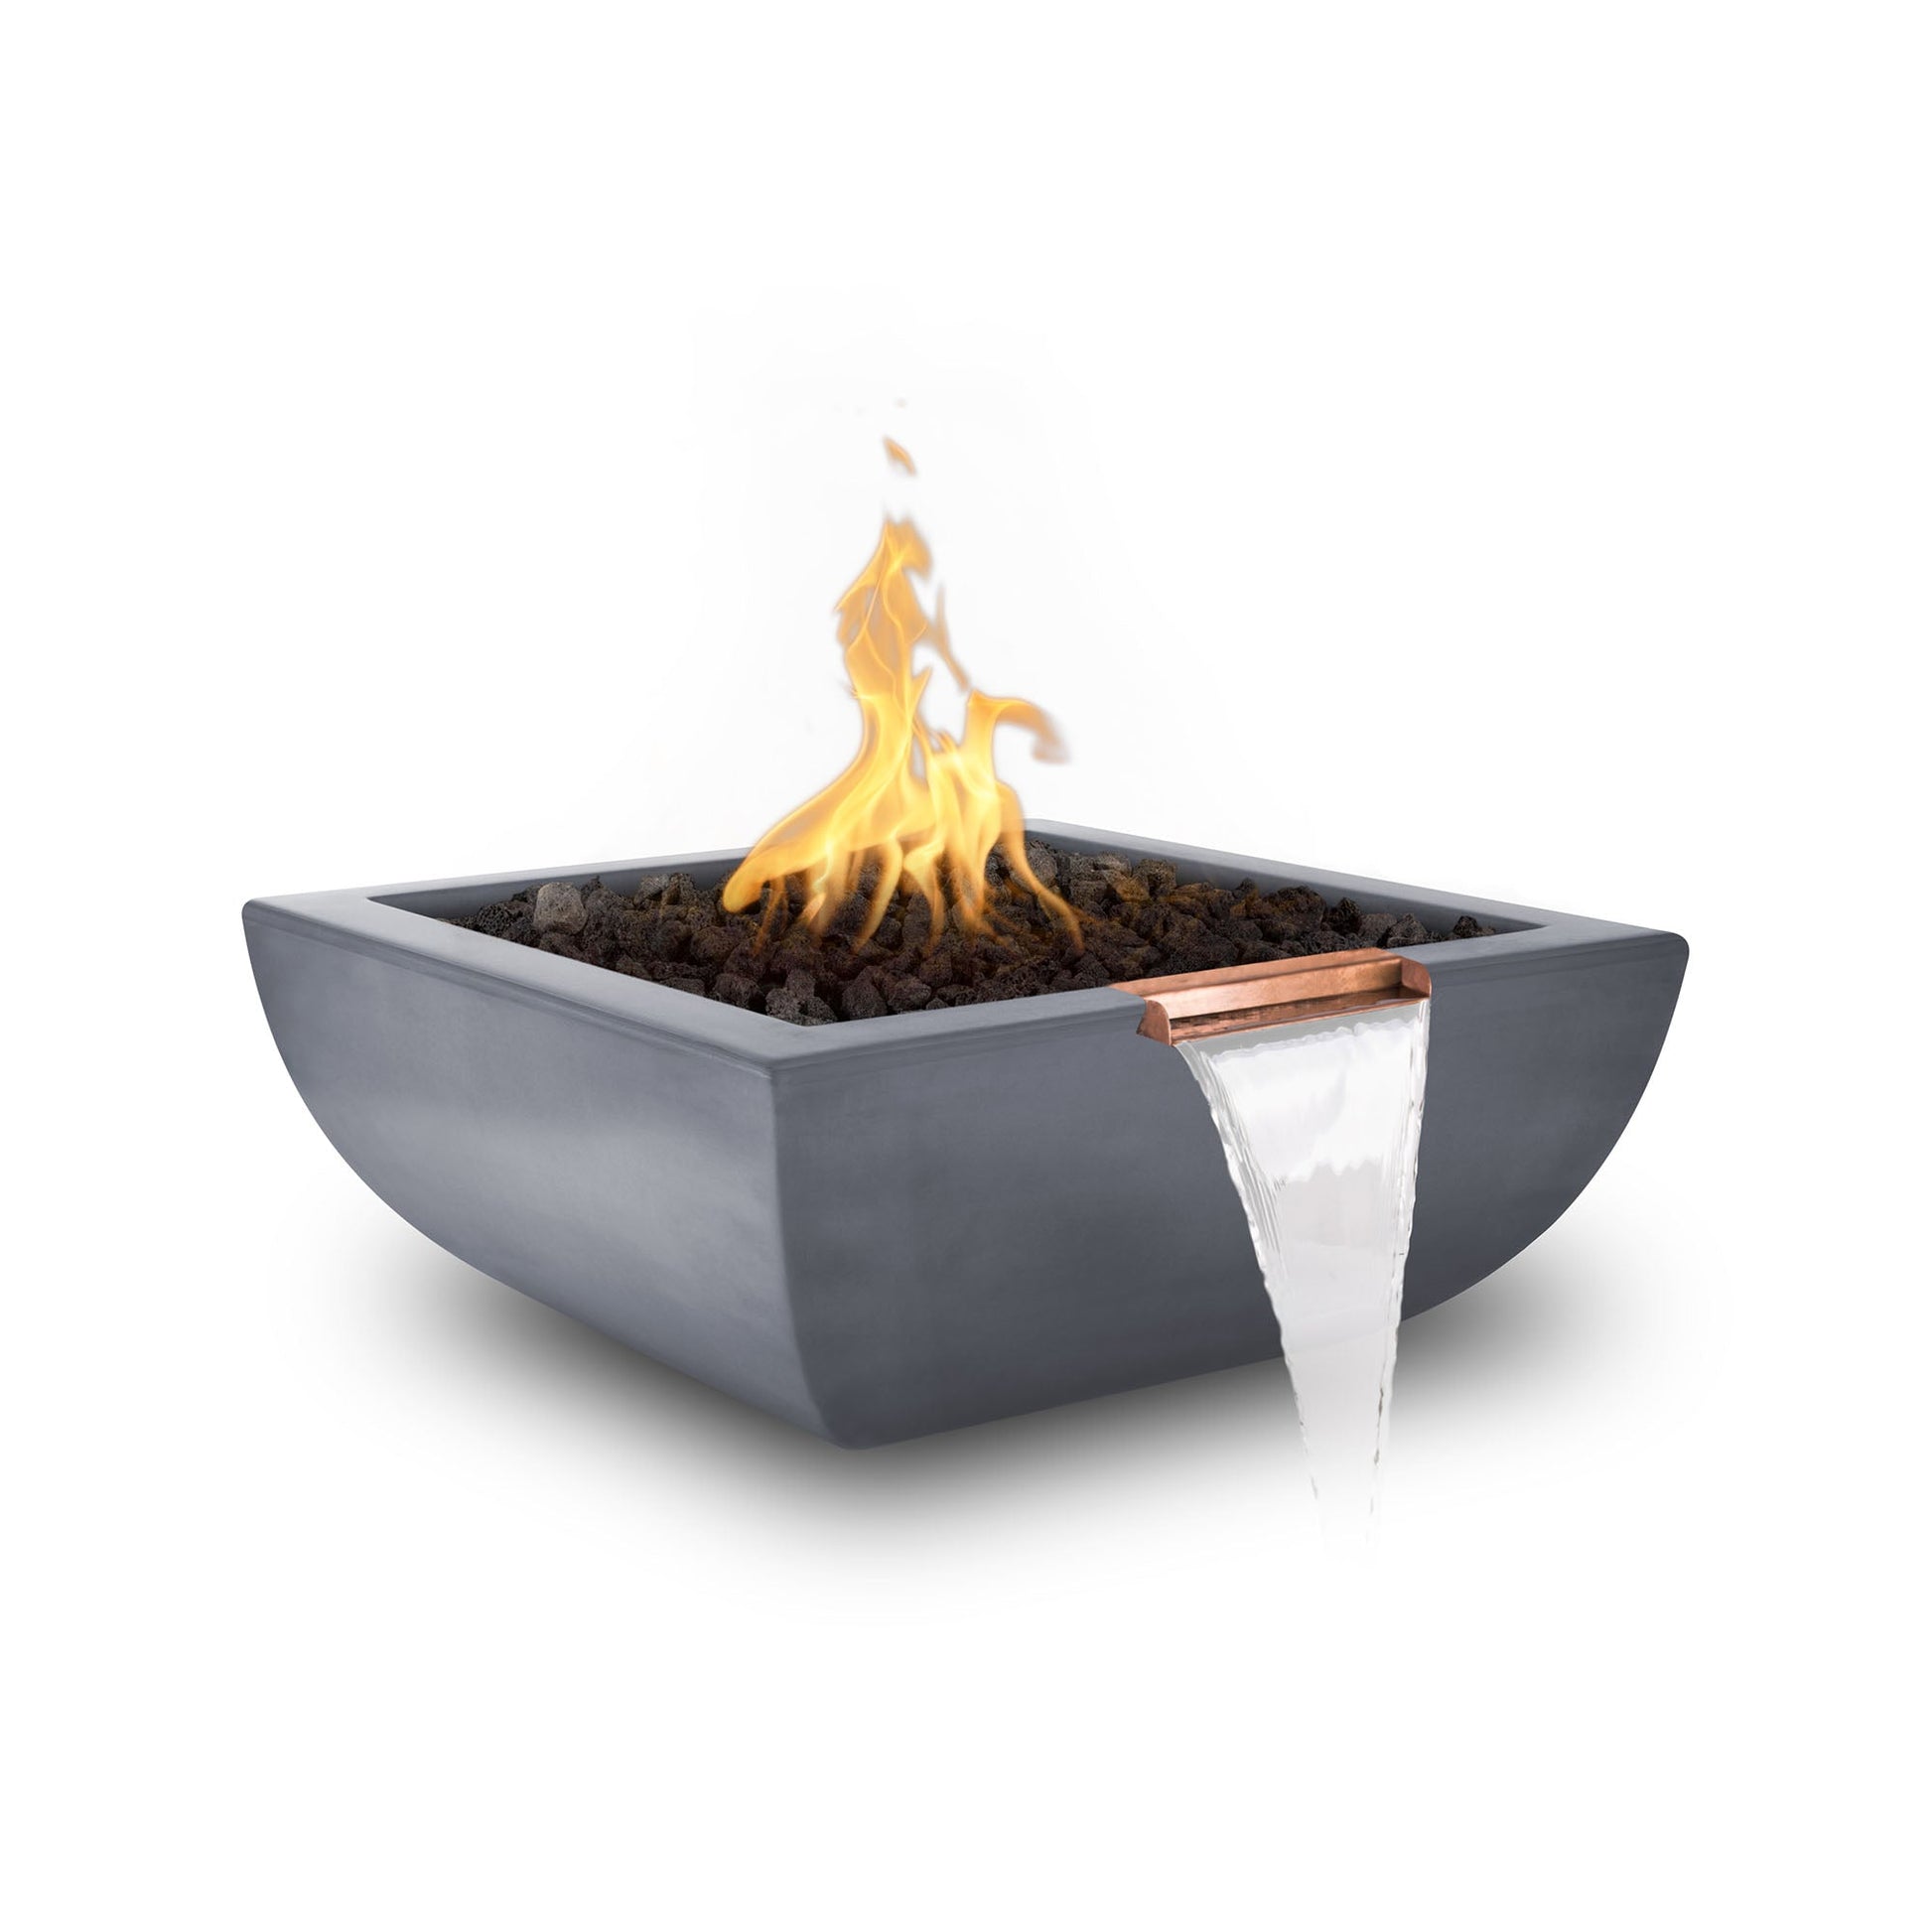 The Outdoor Plus Square Avalon 30" Rustic Moss Stone GFRC Concrete Natural Gas Fire & Water Bowl with Match Lit with Flame Sense Ignition